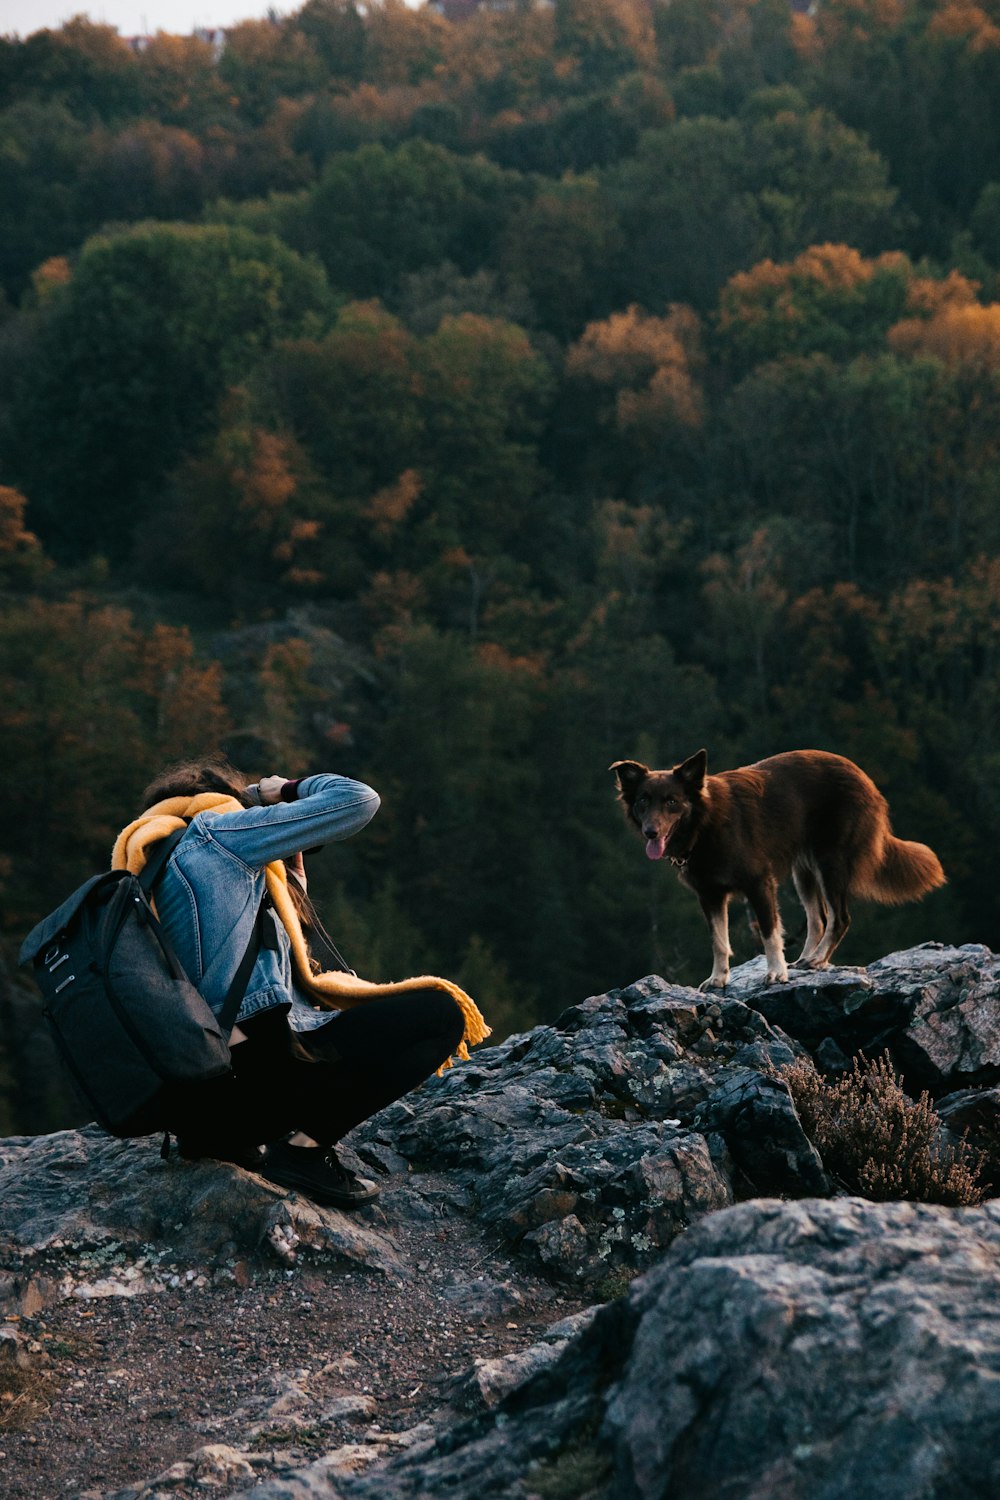 a person and a dog on a rocky hill with trees in the background